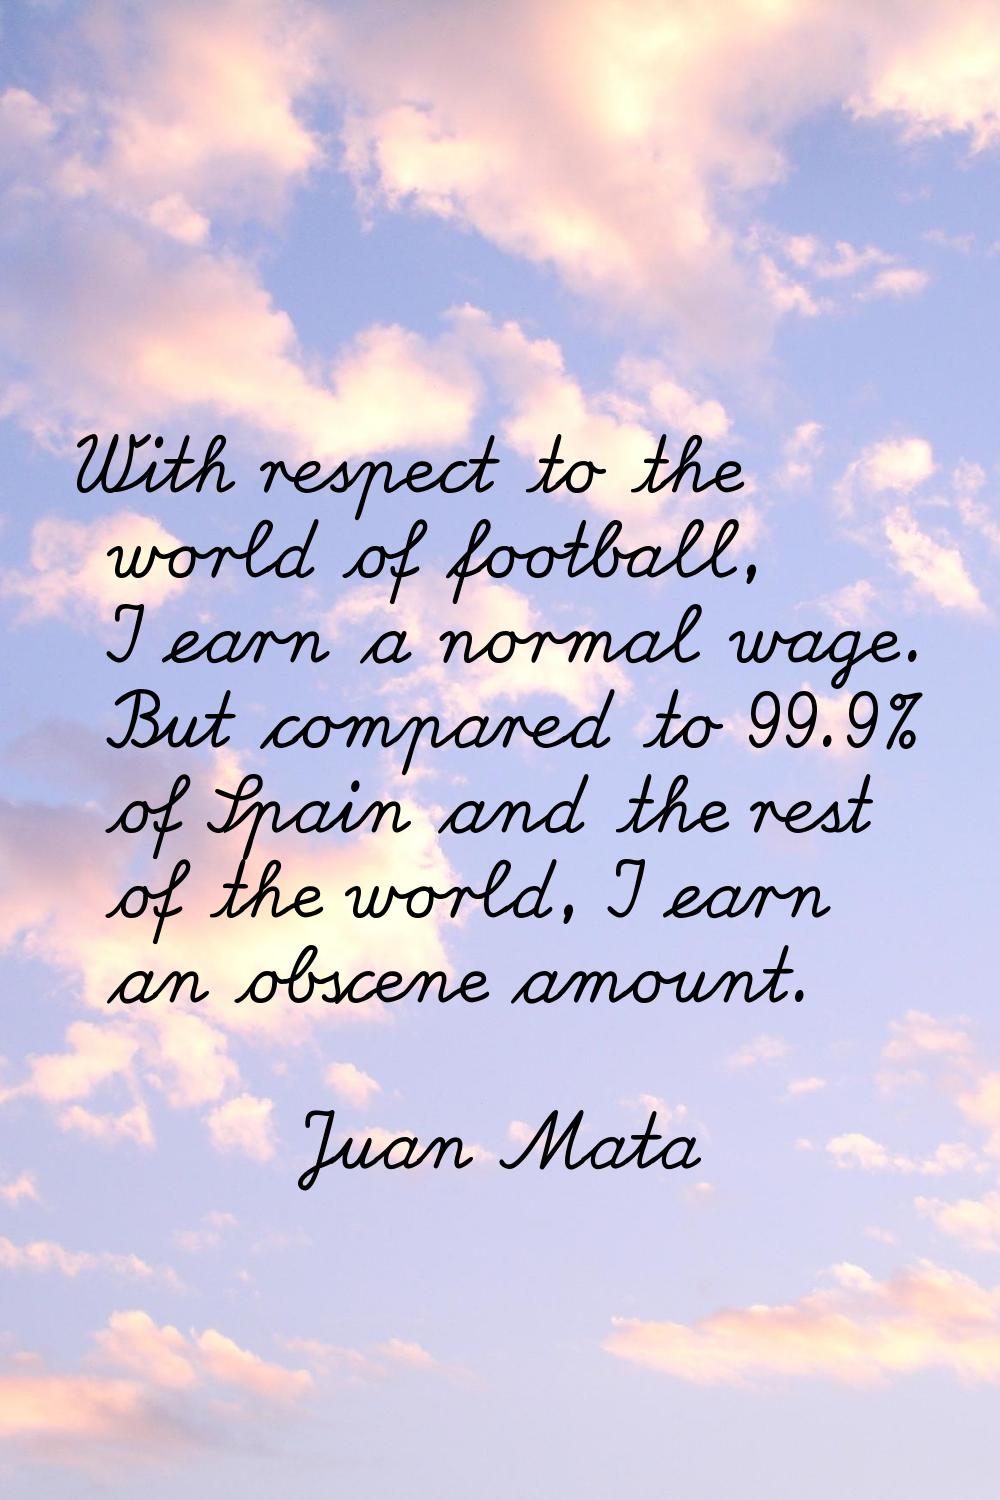 With respect to the world of football, I earn a normal wage. But compared to 99.9% of Spain and the